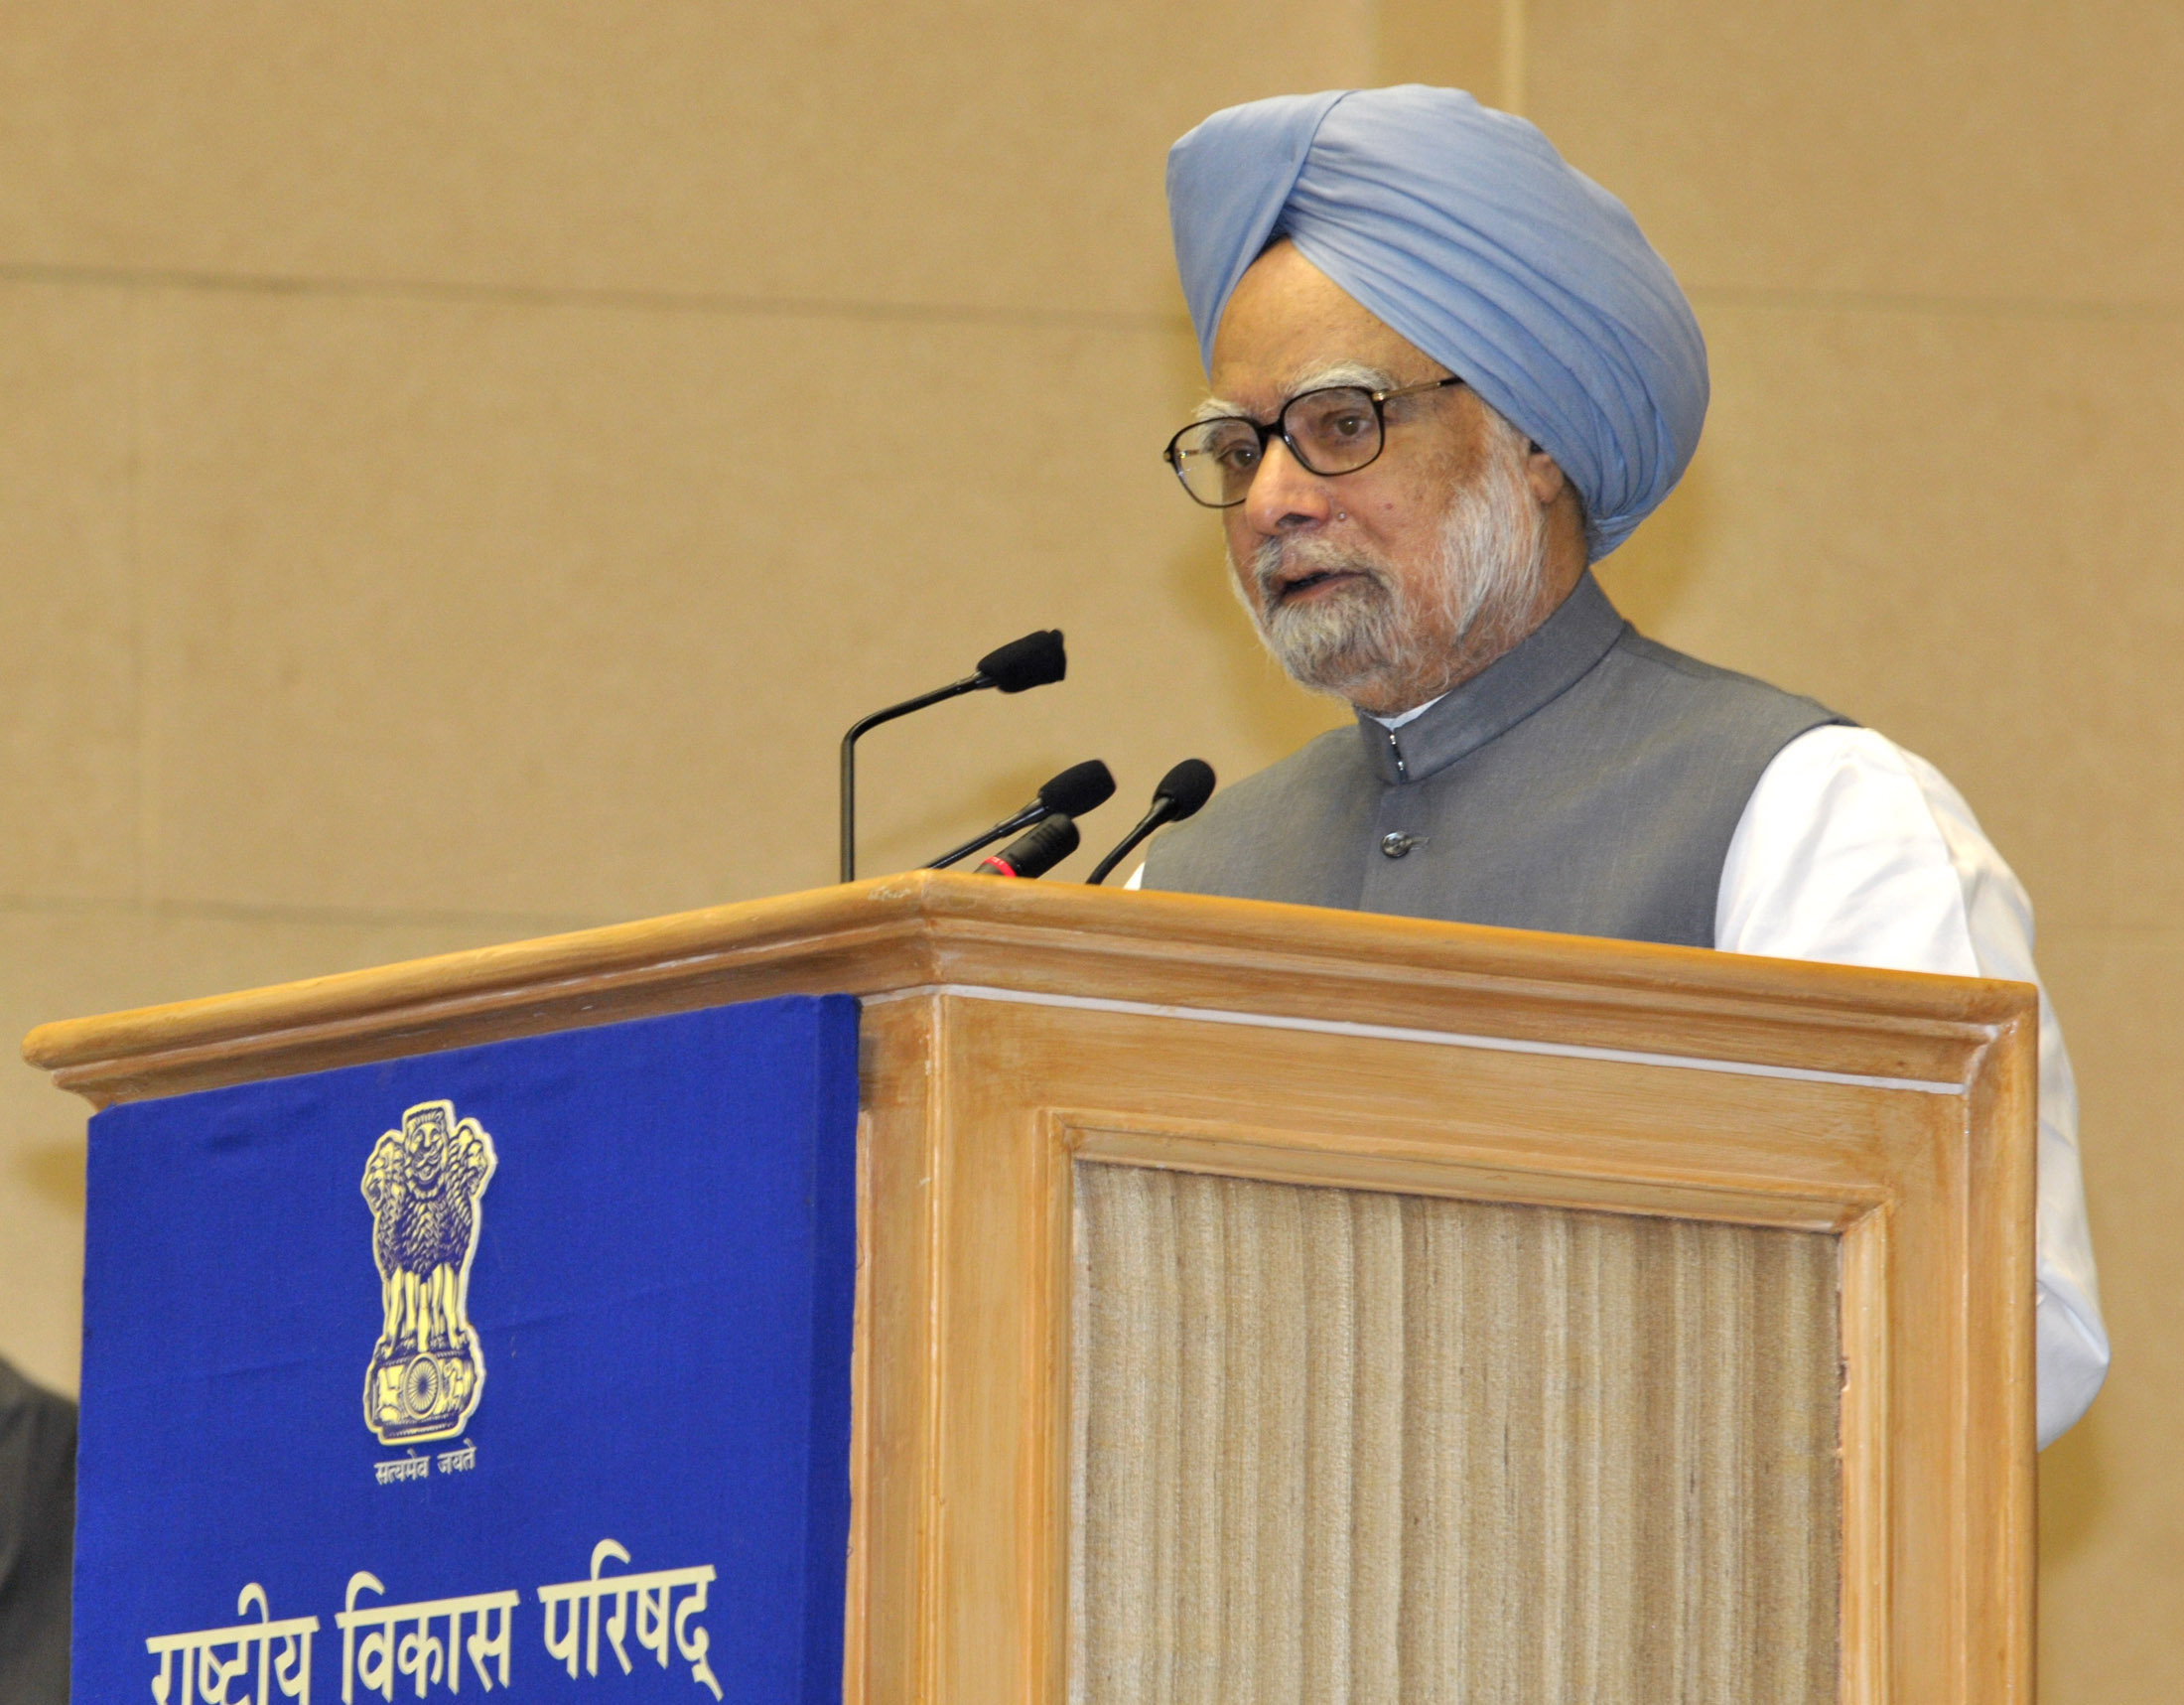 The Prime Minister, Dr. Manmohan Singh addressing the 55th National Development Council Meeting, in New Delhi on July 24, 2010.